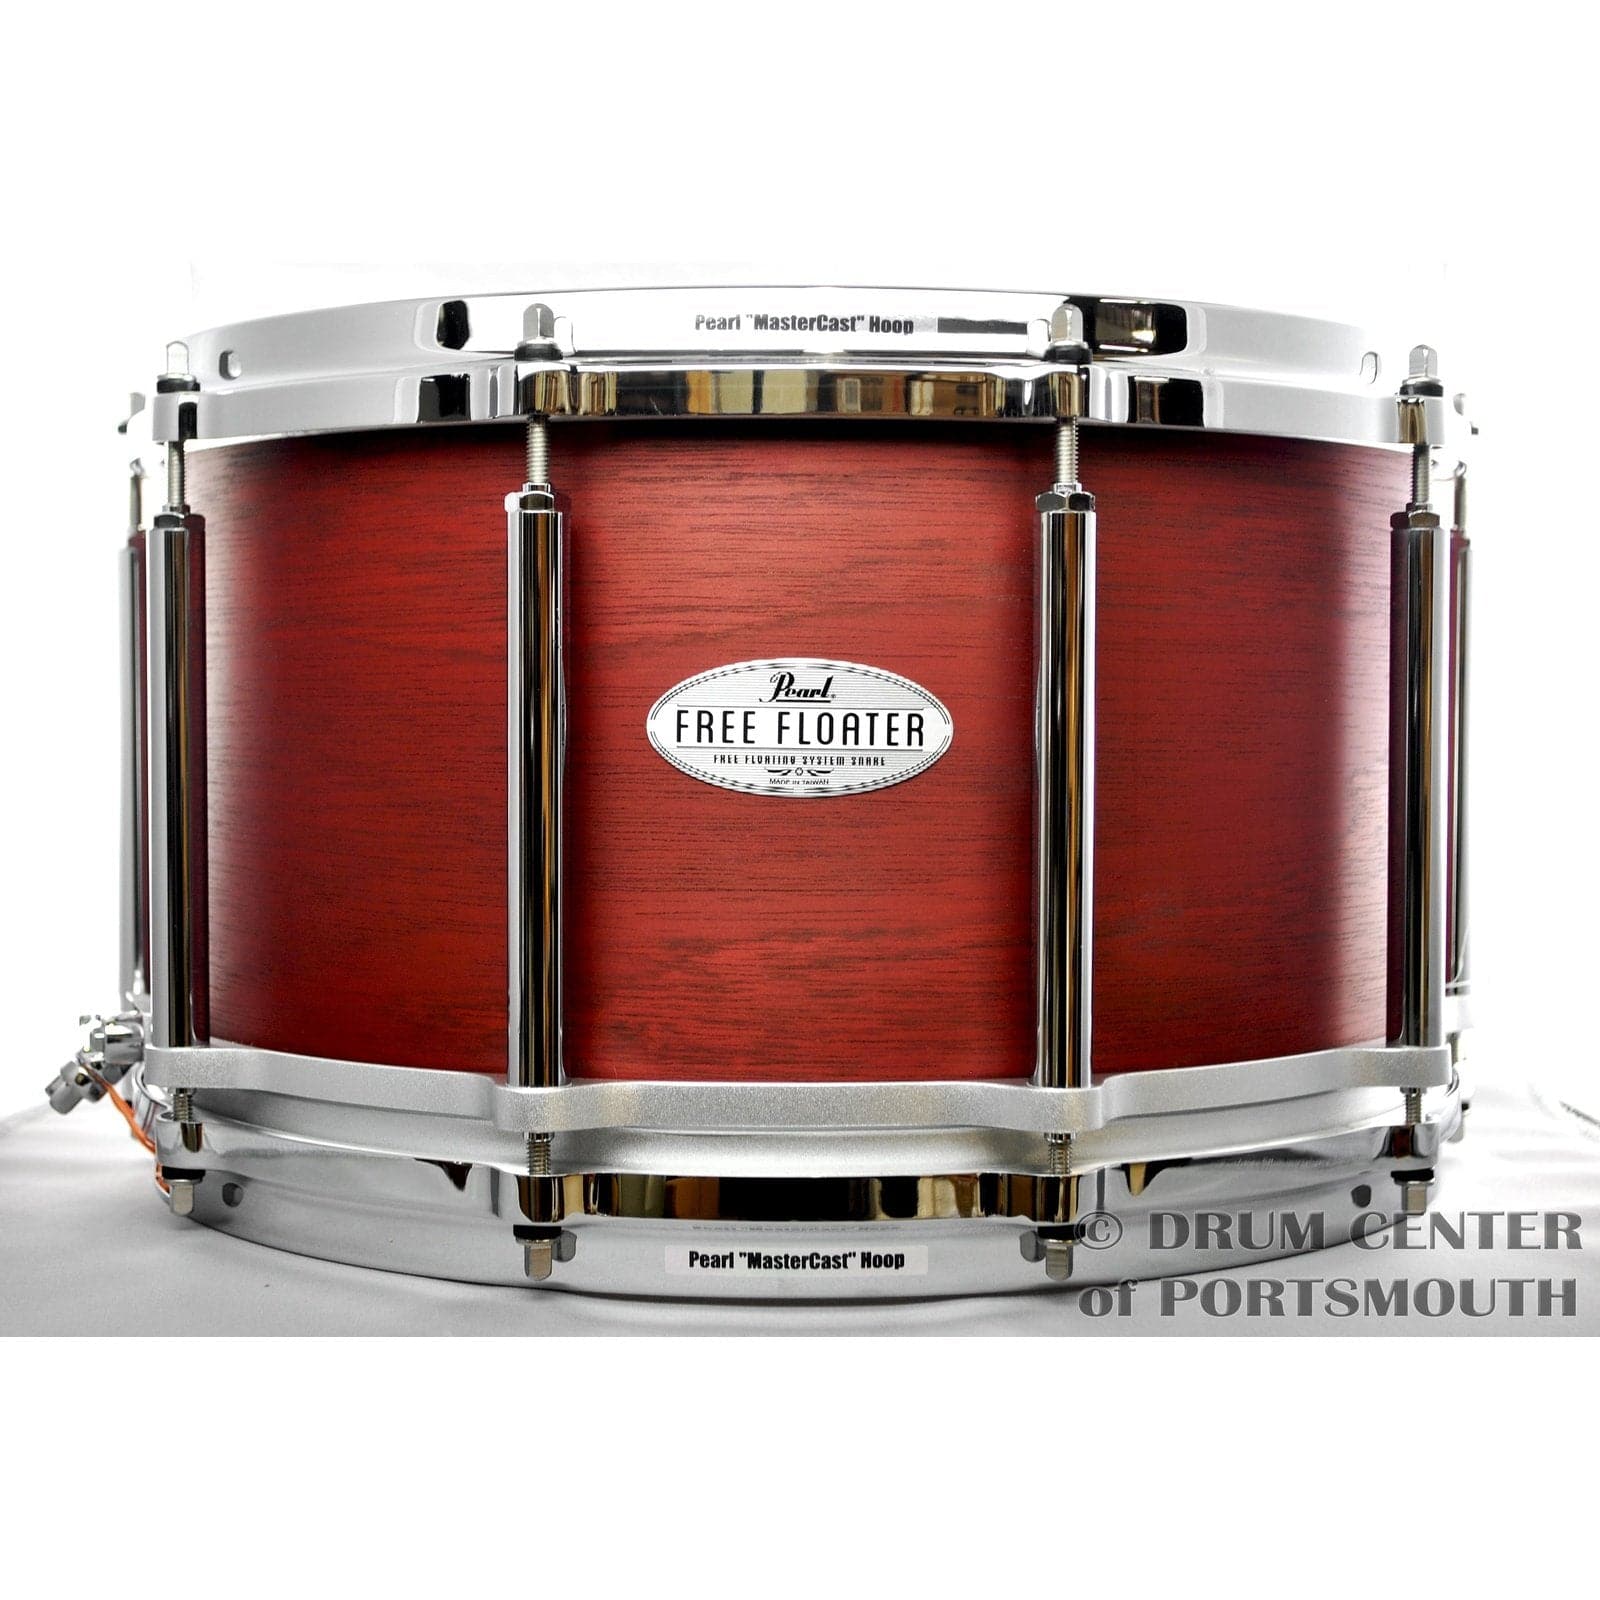 Buy Pearl Philharmonic Concert Snare, 4-Ply 14 x 5.0 Mahogany Shell with  Silent Strainer Matte Walnut Finish - Online Best Price